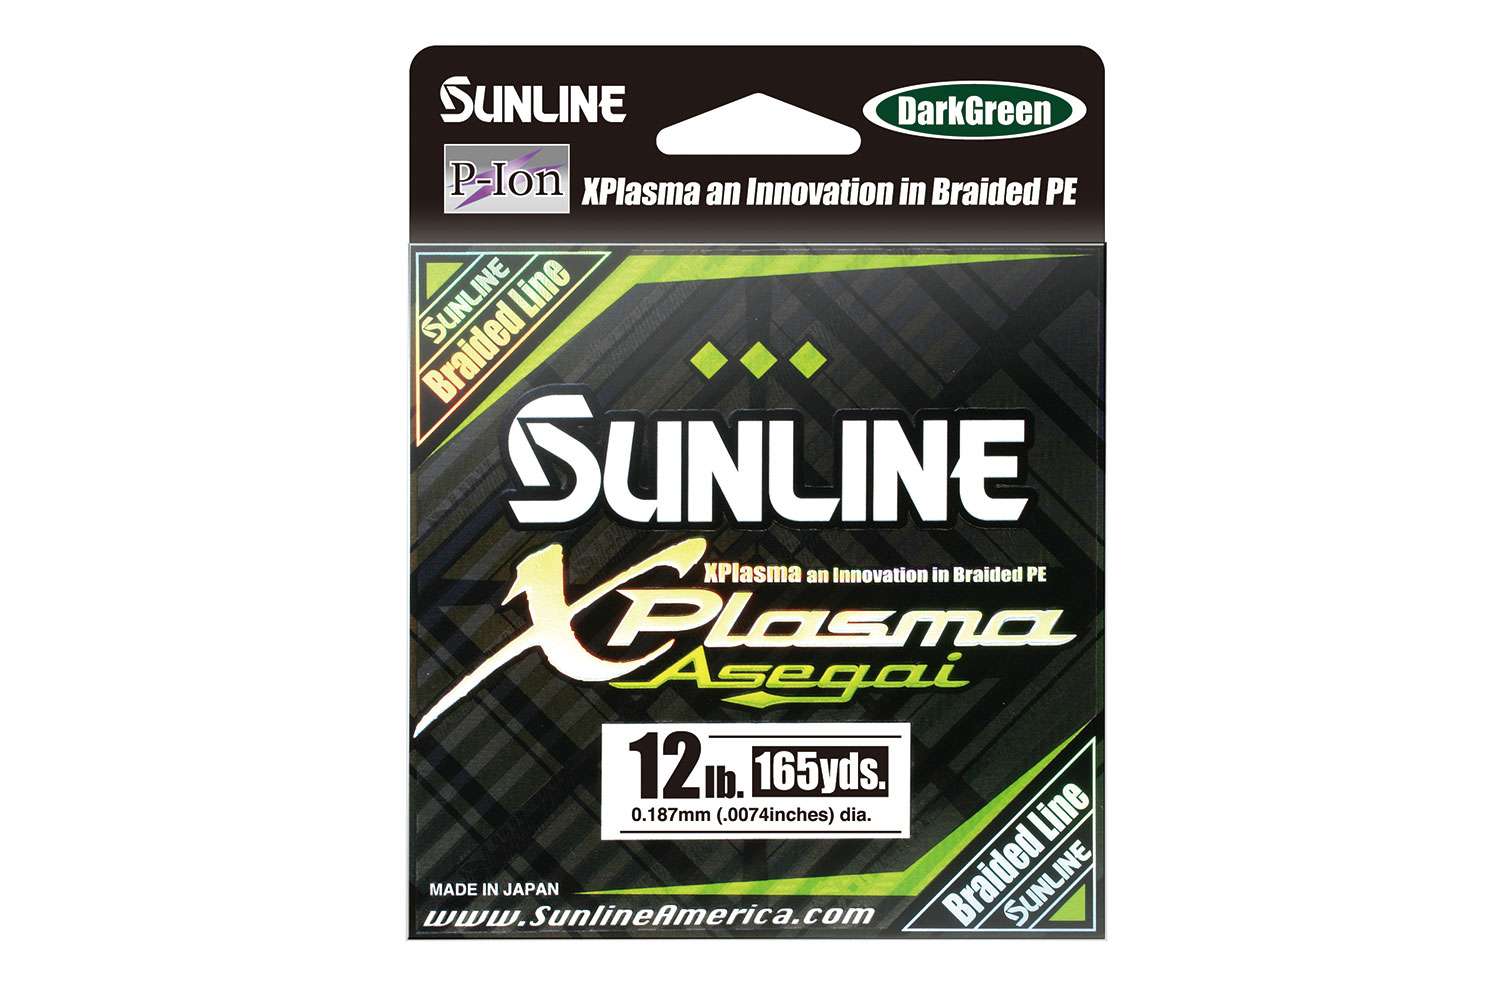 <p><b>Sunline XPlasma Asegai, $23.99-$75.99</b></p> Xplasma Asegai is an eight stranded braided line using Izanas braided line construction and is the first braided line to be made with Sunlineâs patented P-Ion process technology. This results in a braided line that has a slicker surface, creating less friction when passing through the rods line guides, increased casting distance, and cutting down on line noise. It is manufactured with strong water repelling characteristics and has improved abrasion resistance increasing the lines performance. </p>  <p>XPlasma Asegai will come in two spool sizes 165 and 600 yards, and will be available in 8-, 10-, 12-, 16-, 18-, 30-, 50- and 60-pound break strengths, and will be available in two colors light green, and dark green.  <br> <a href=